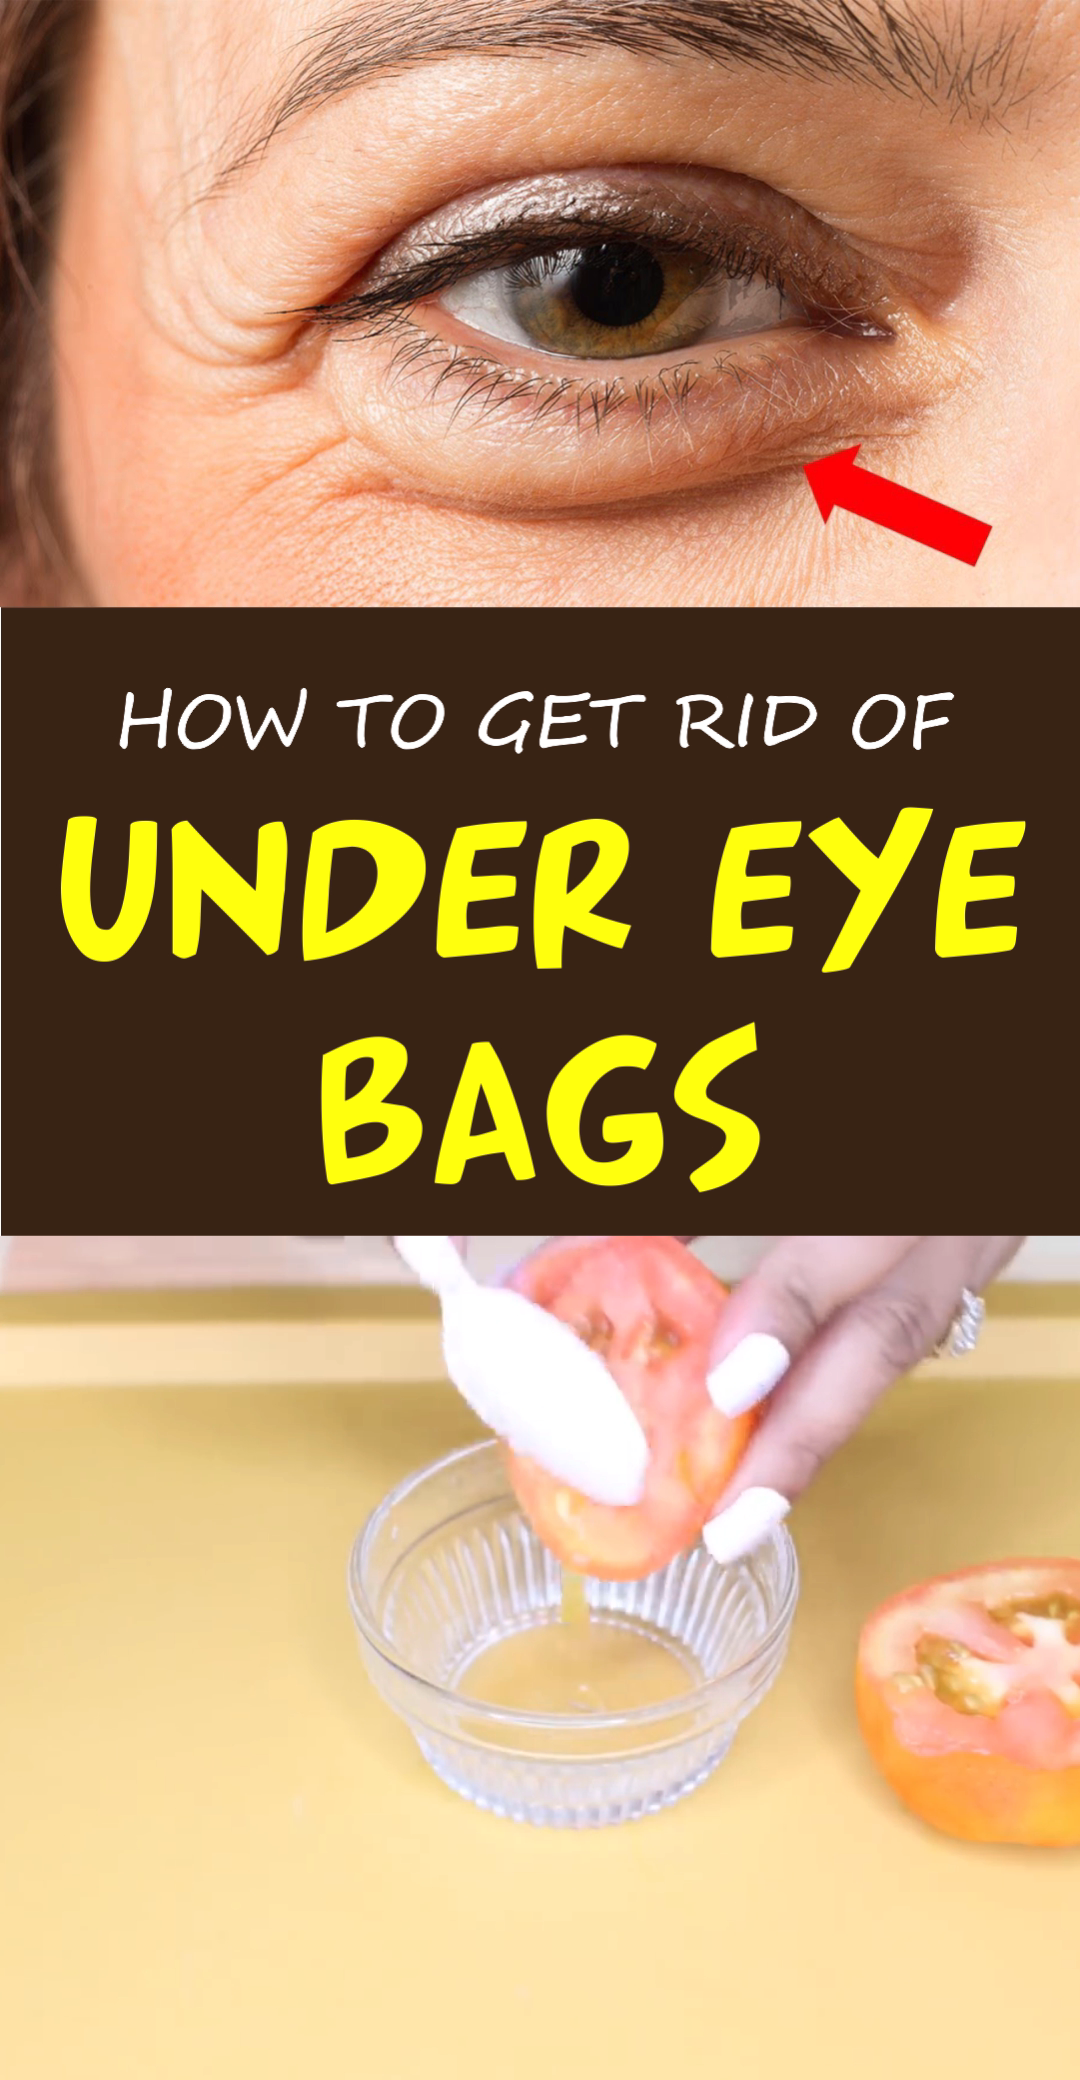 How to Get Rid of Dark Circles Under Your Eyes: Top 9 Home Remedies that Work - How to Get Rid of Dark Circles Under Your Eyes: Top 9 Home Remedies that Work -   19 diy Face Mask for wrinkles ideas